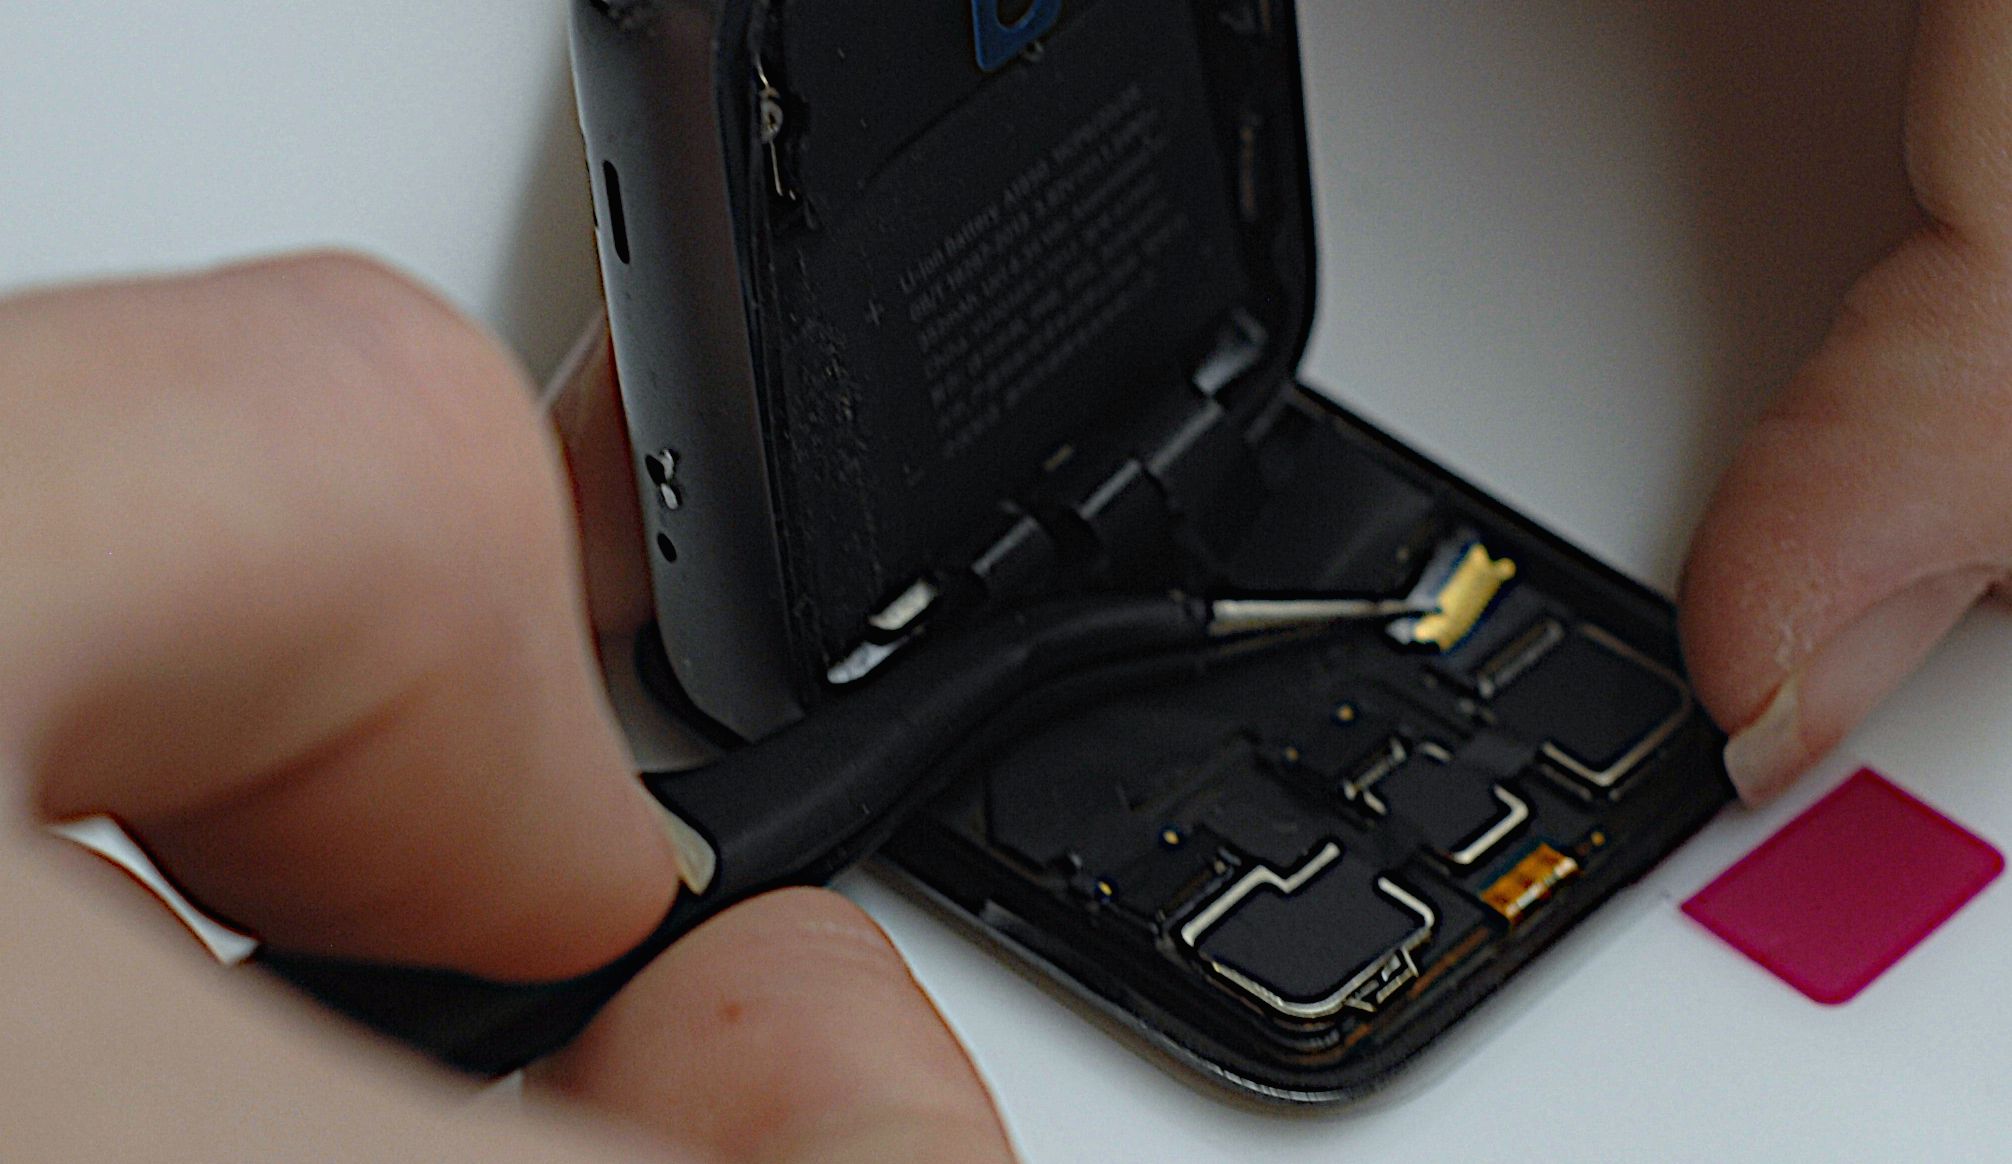 reconnecting the display cable connectors inside an apple watch